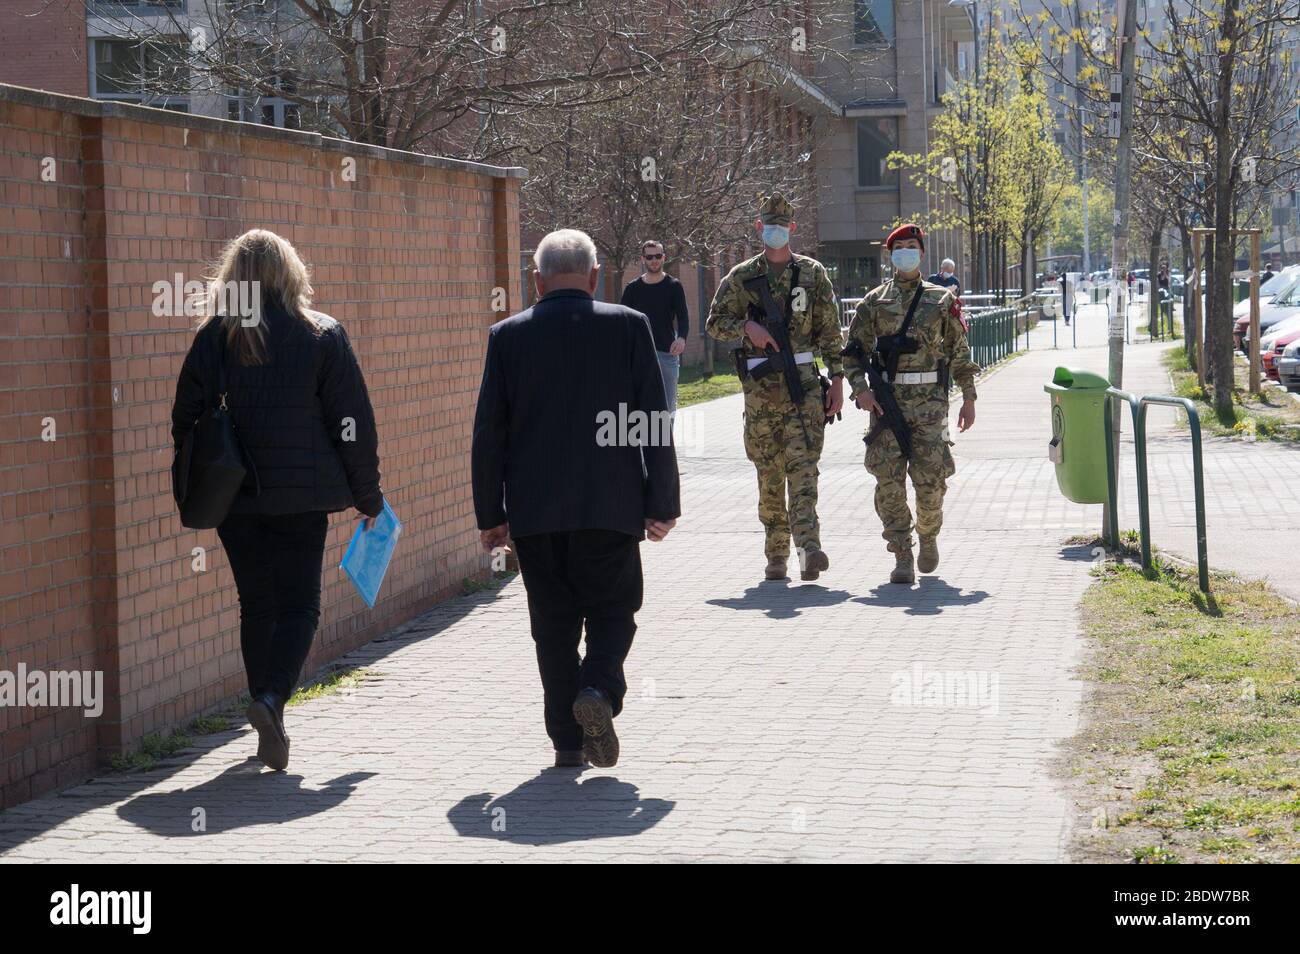 Budapest, Hungary. 9th Apr, 2020. Military personnel patrol along a street in Budapest, Hungary, on April 9, 2020. The Hungarian government will indefinitely extend the lockdown imposed nearly two weeks ago due to the coronavirus epidemic, Prime Minister Viktor Orban announced on his Facebook page on Thursday. According to official figures, the number of confirmed coronavirus cases in Hungary stood at 980 on Thursday, with 96 recoveries and 66 fatalities. Credit: Attila Volgyi/Xinhua/Alamy Live News Stock Photo